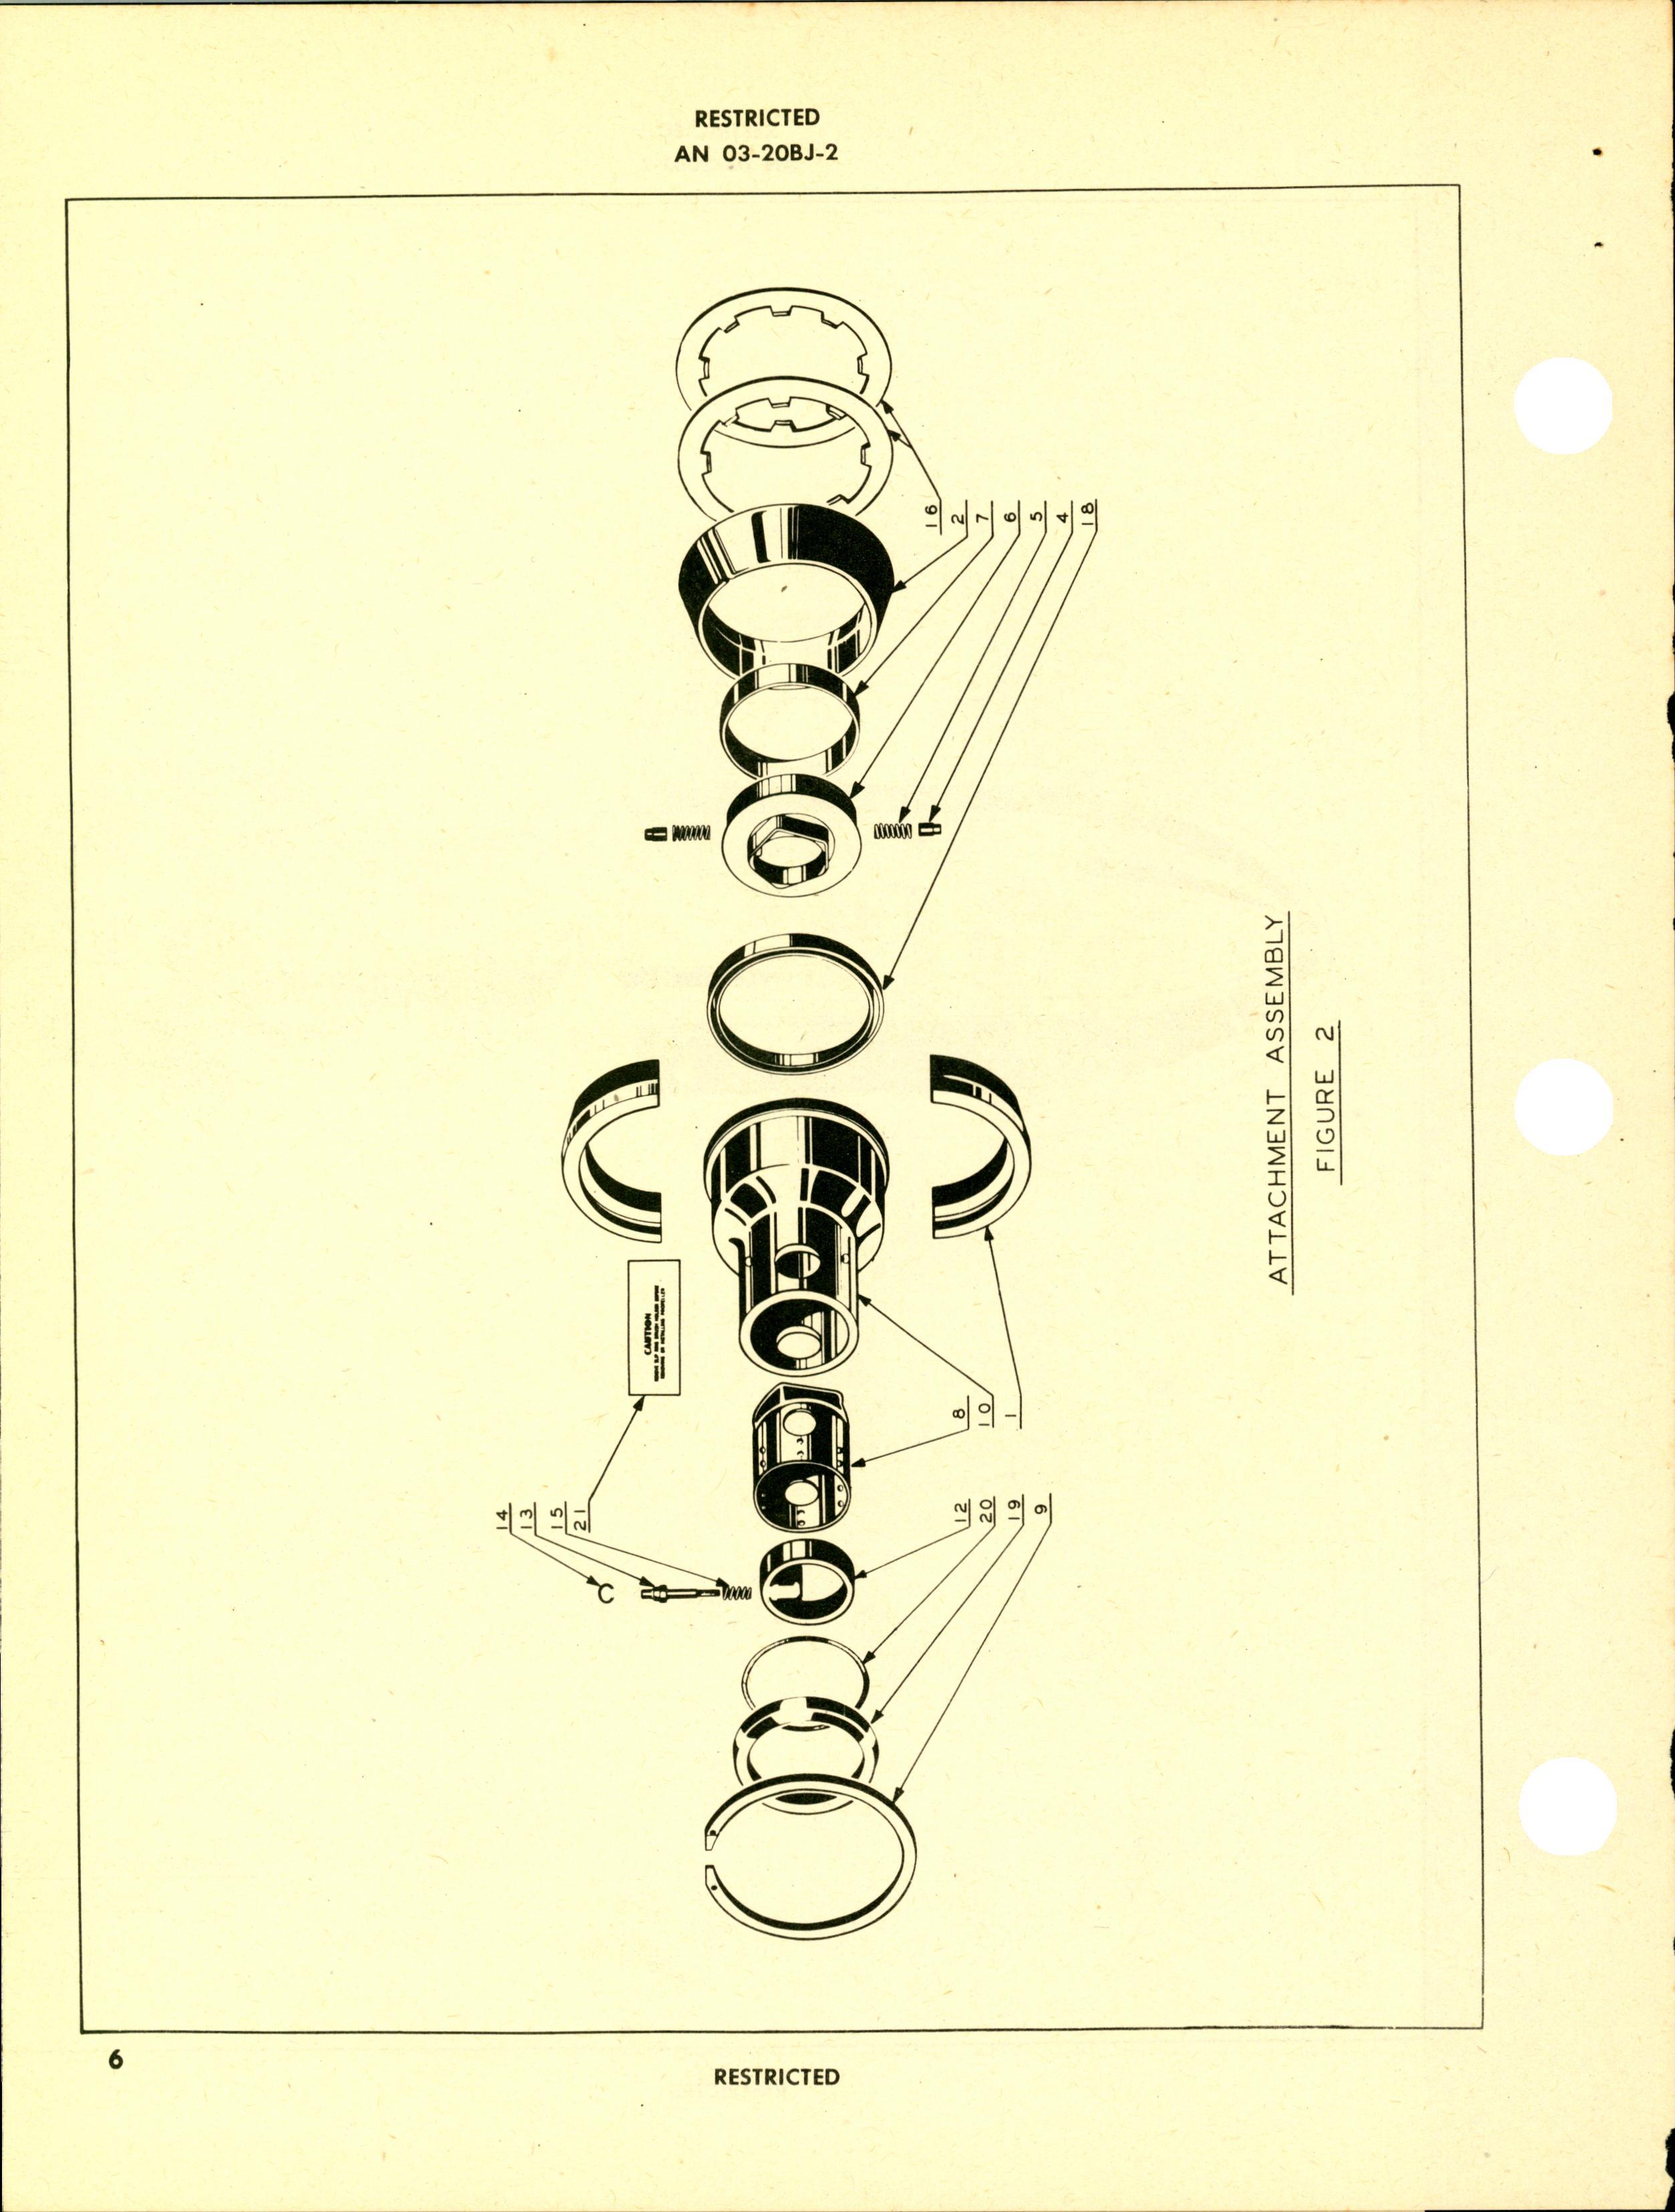 Sample page 8 from AirCorps Library document: Parts Catalog for Curtiss-Wright Models C532D-F and C5325D-A Electric Propellers